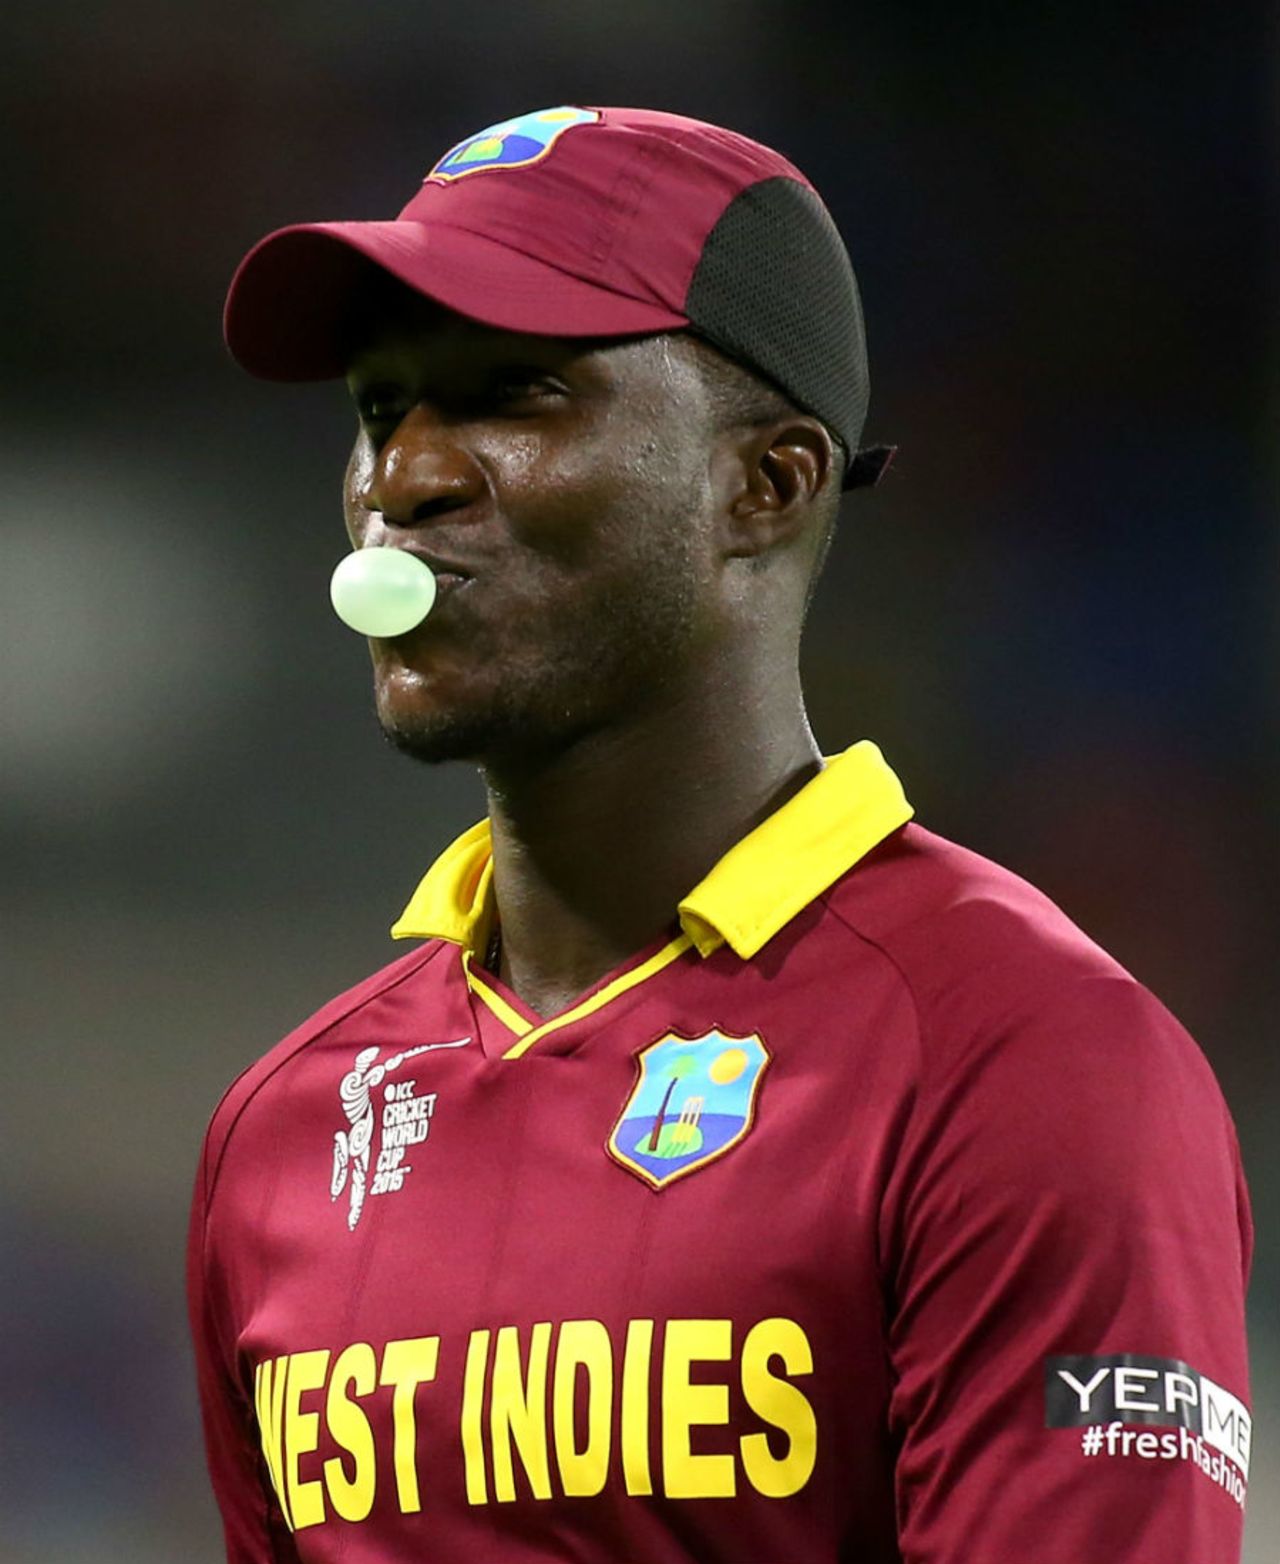 Bubble popped: Darren Sammy walks off the field, India v West Indies, World Cup 2015, Group B, Perth, March 6